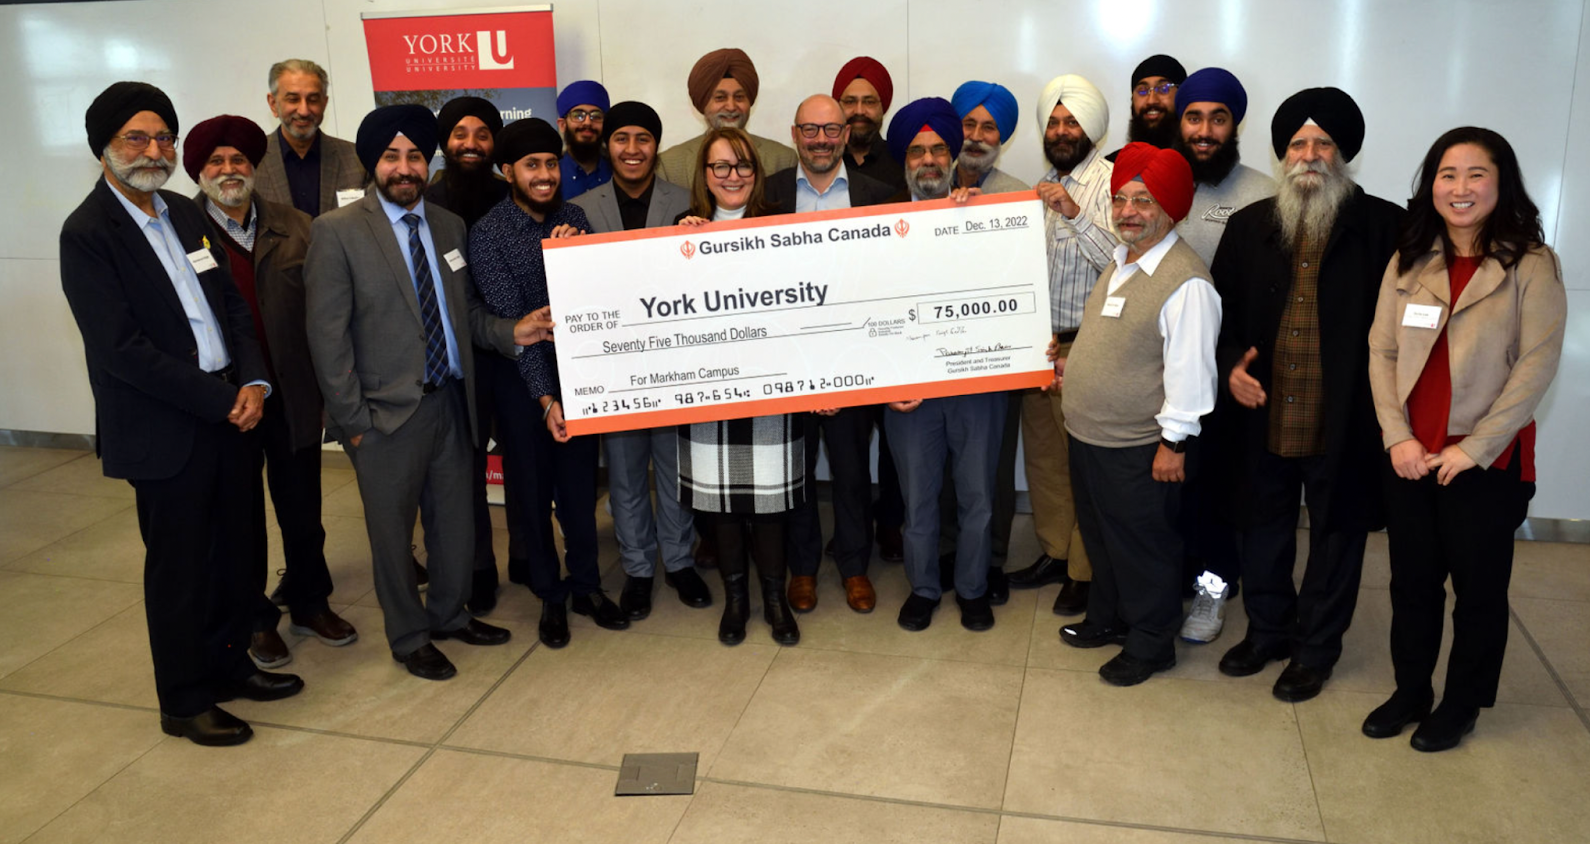 York University staff and members of York Sikh Students Association and Gursikh Sabha Canada pose for a picture presenting Gursikh Sabha's cheque to the University.